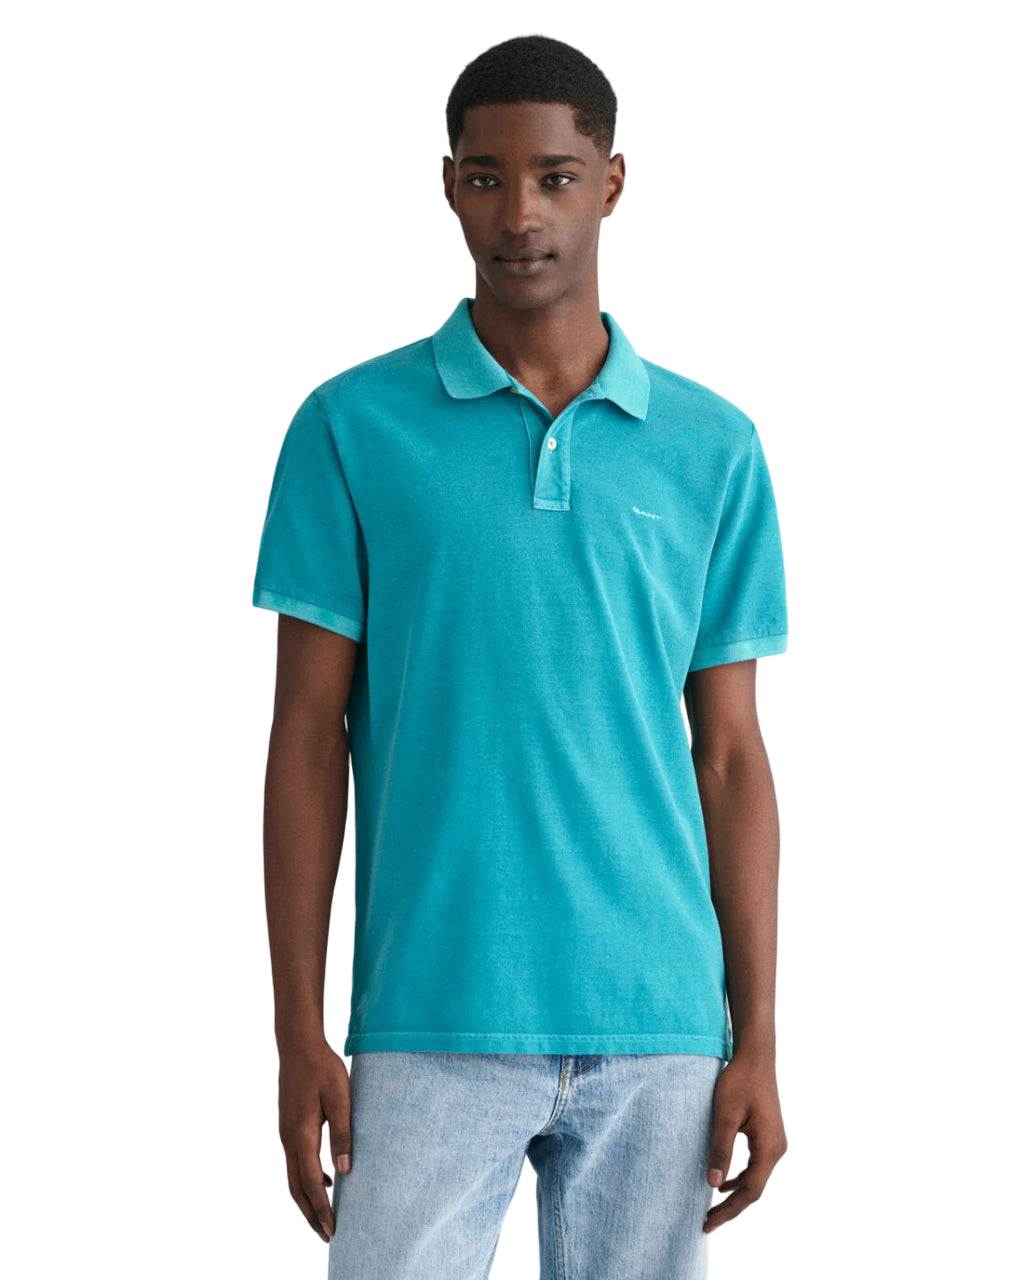 GANT POLO SUNFADED IN PIQUE REGULAR FIT OCEAN TURQUOISE